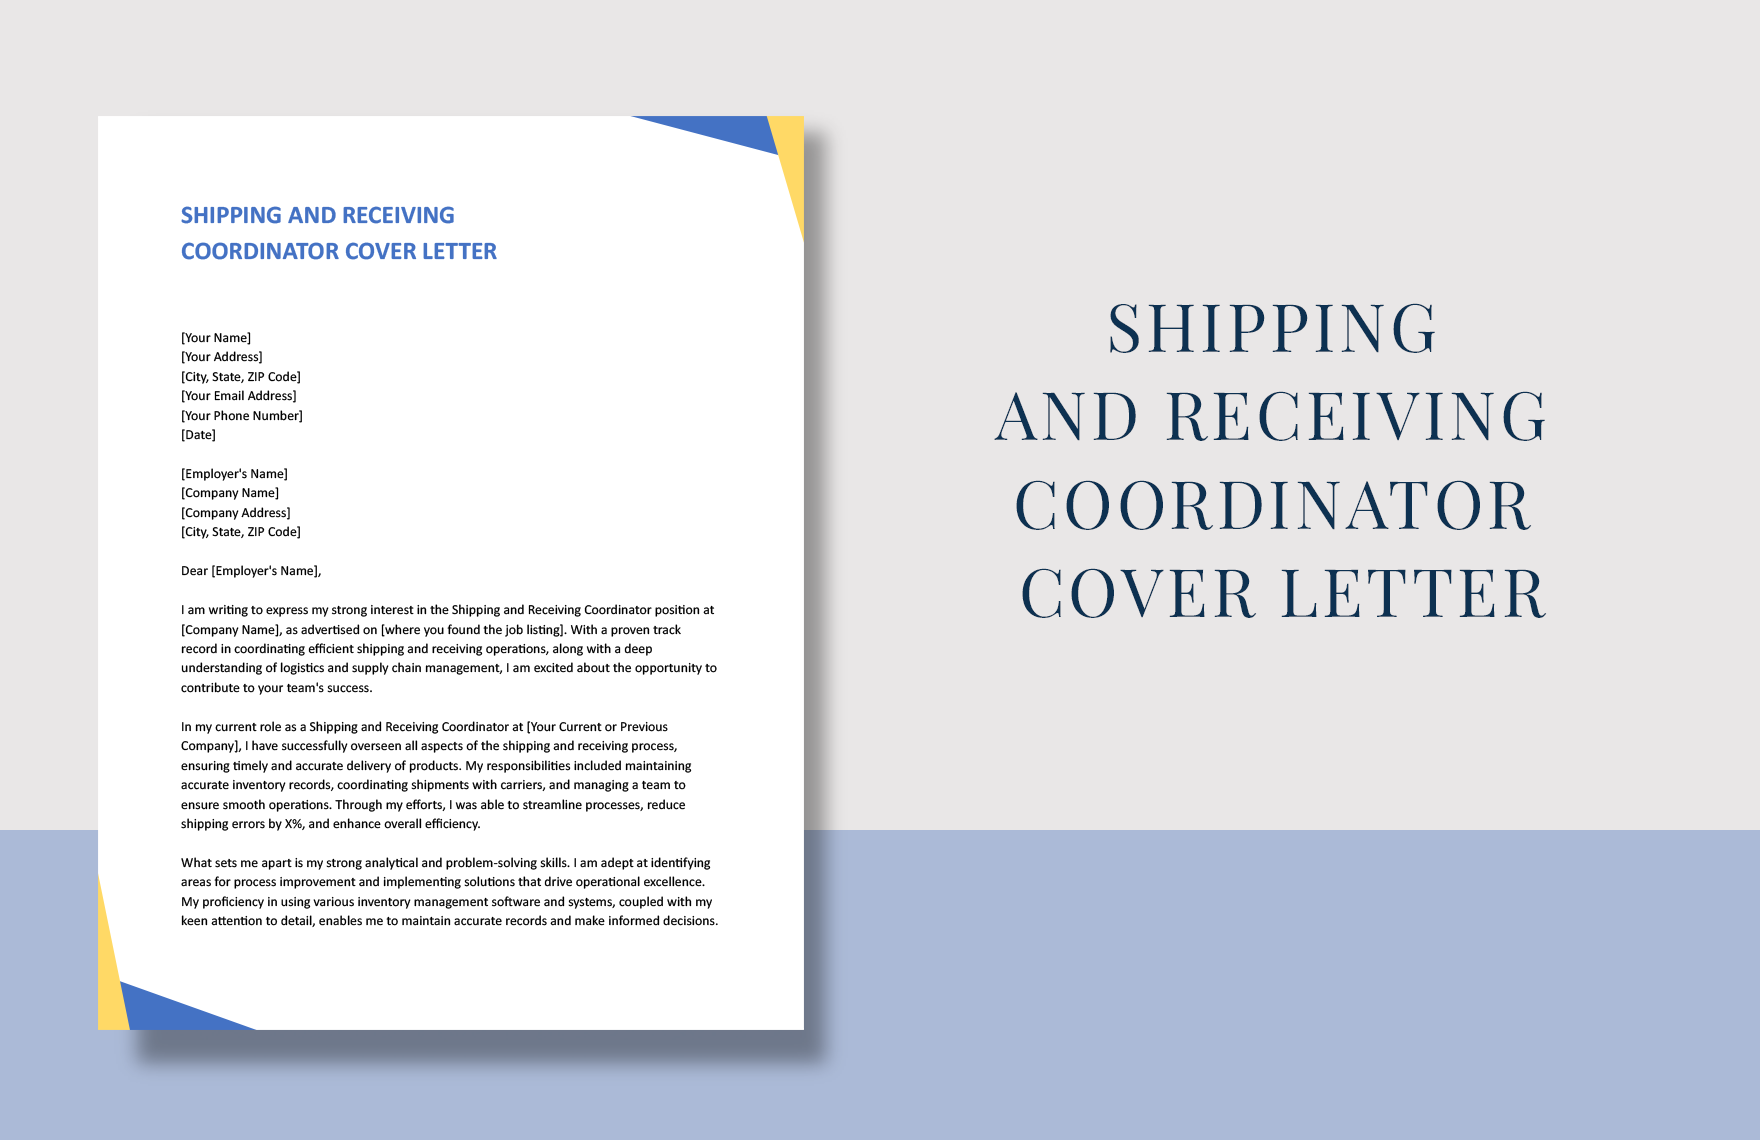 Shipping And Receiving Coordinator Cover Letter in Word, Google Docs, Apple Pages